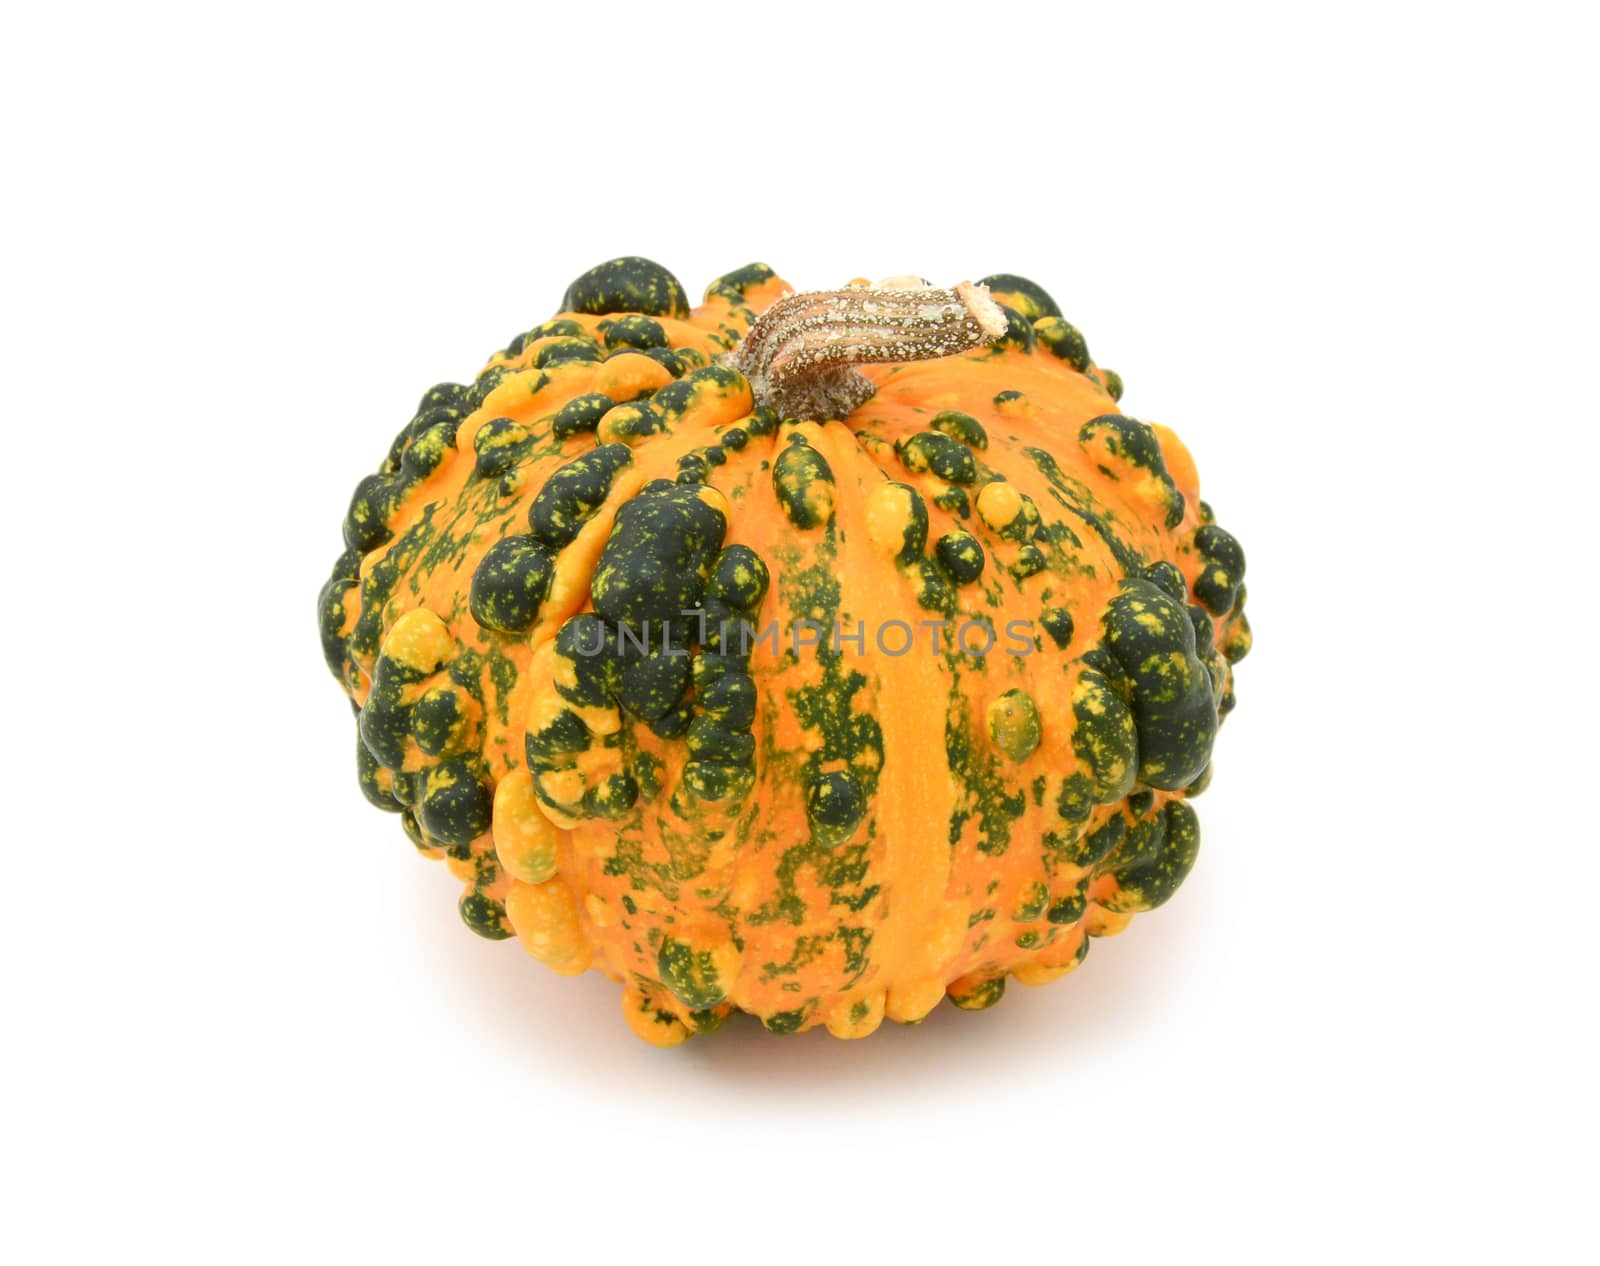 Unusual warted ornamental gourd with orange and green skin by sarahdoow